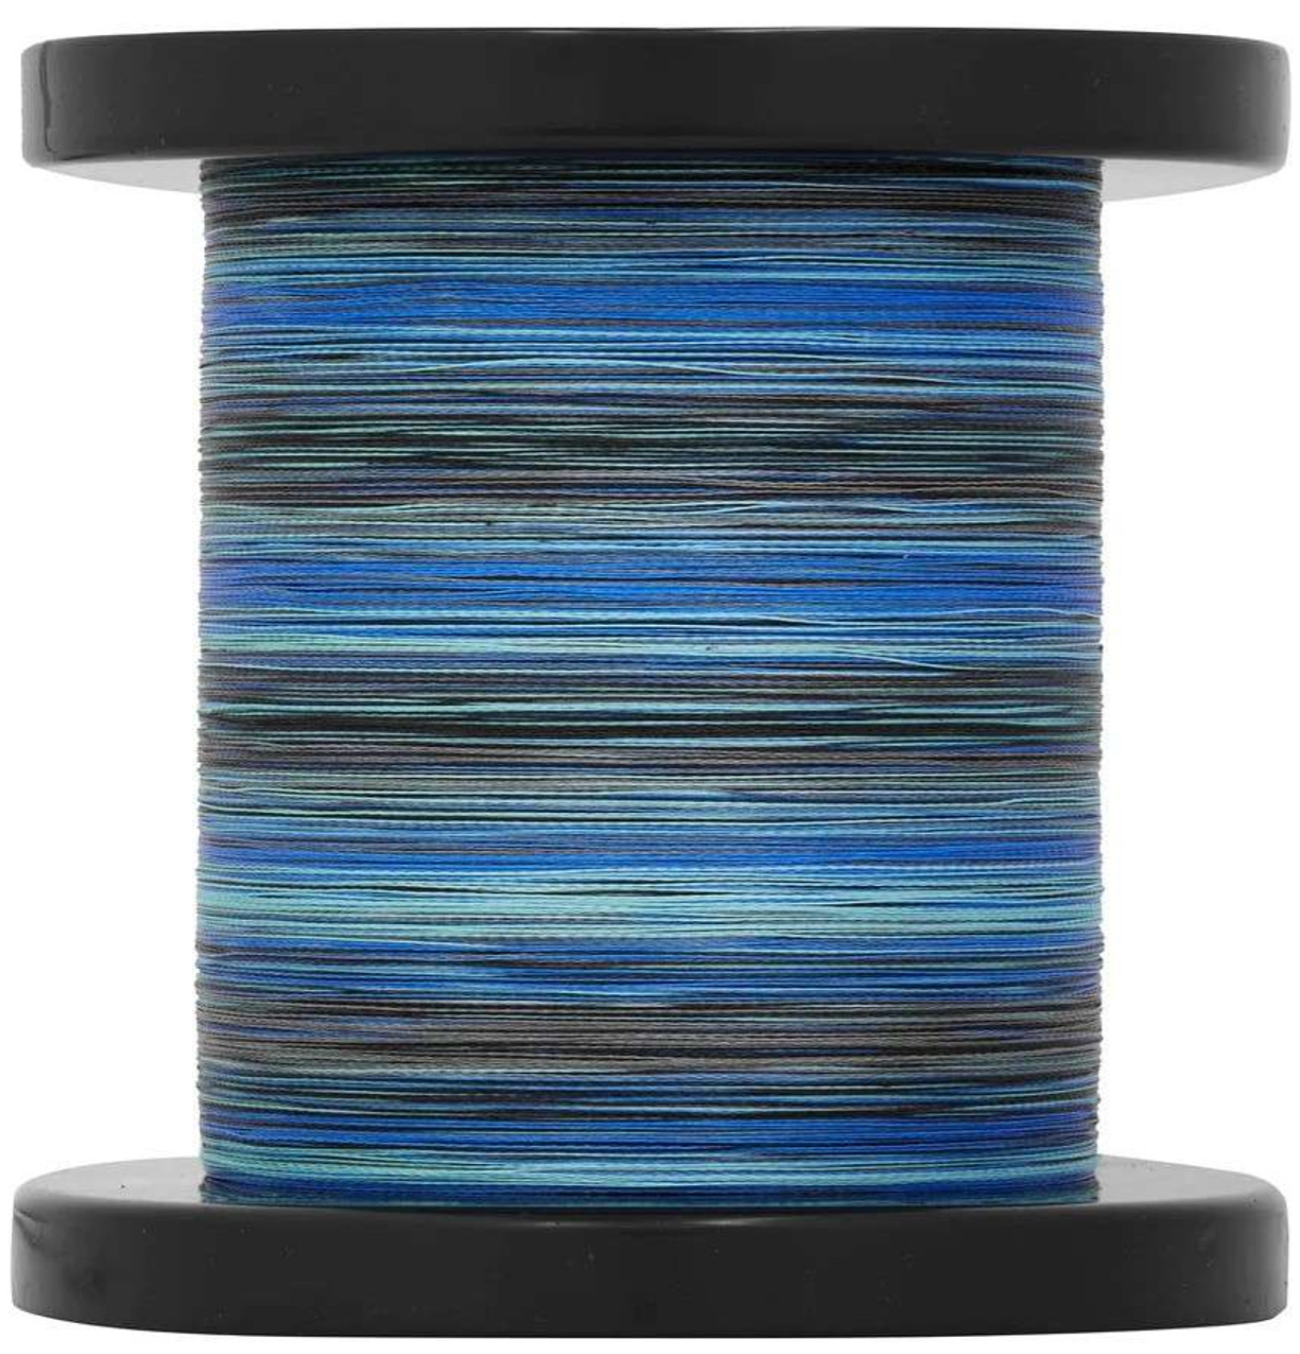 Nomad Design Panderra X4 Braided Line (Assorted Sizes, 3000yd, Multico